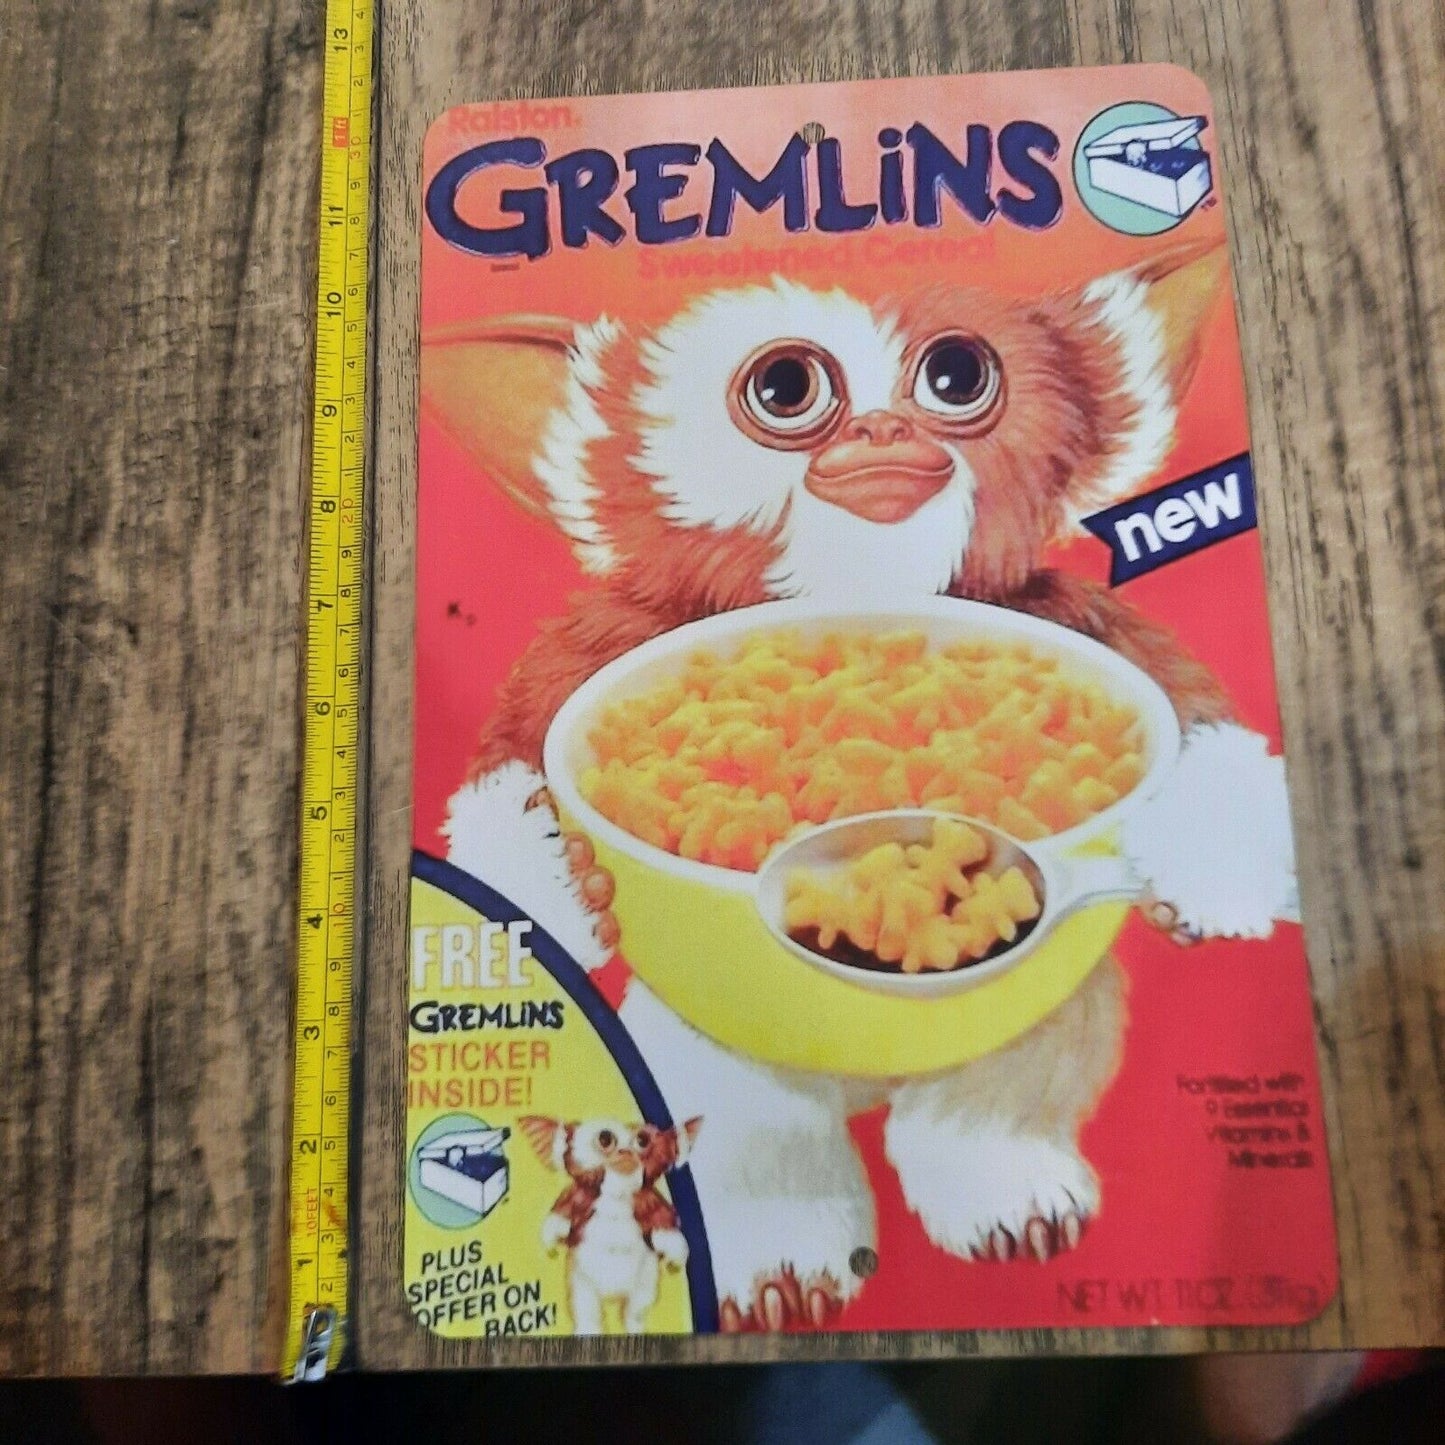 Gremlins Cereal Box Gizmo Retro 80s 8x12 Metal Wall Sign Horror Holidays Comedy Movie Poster